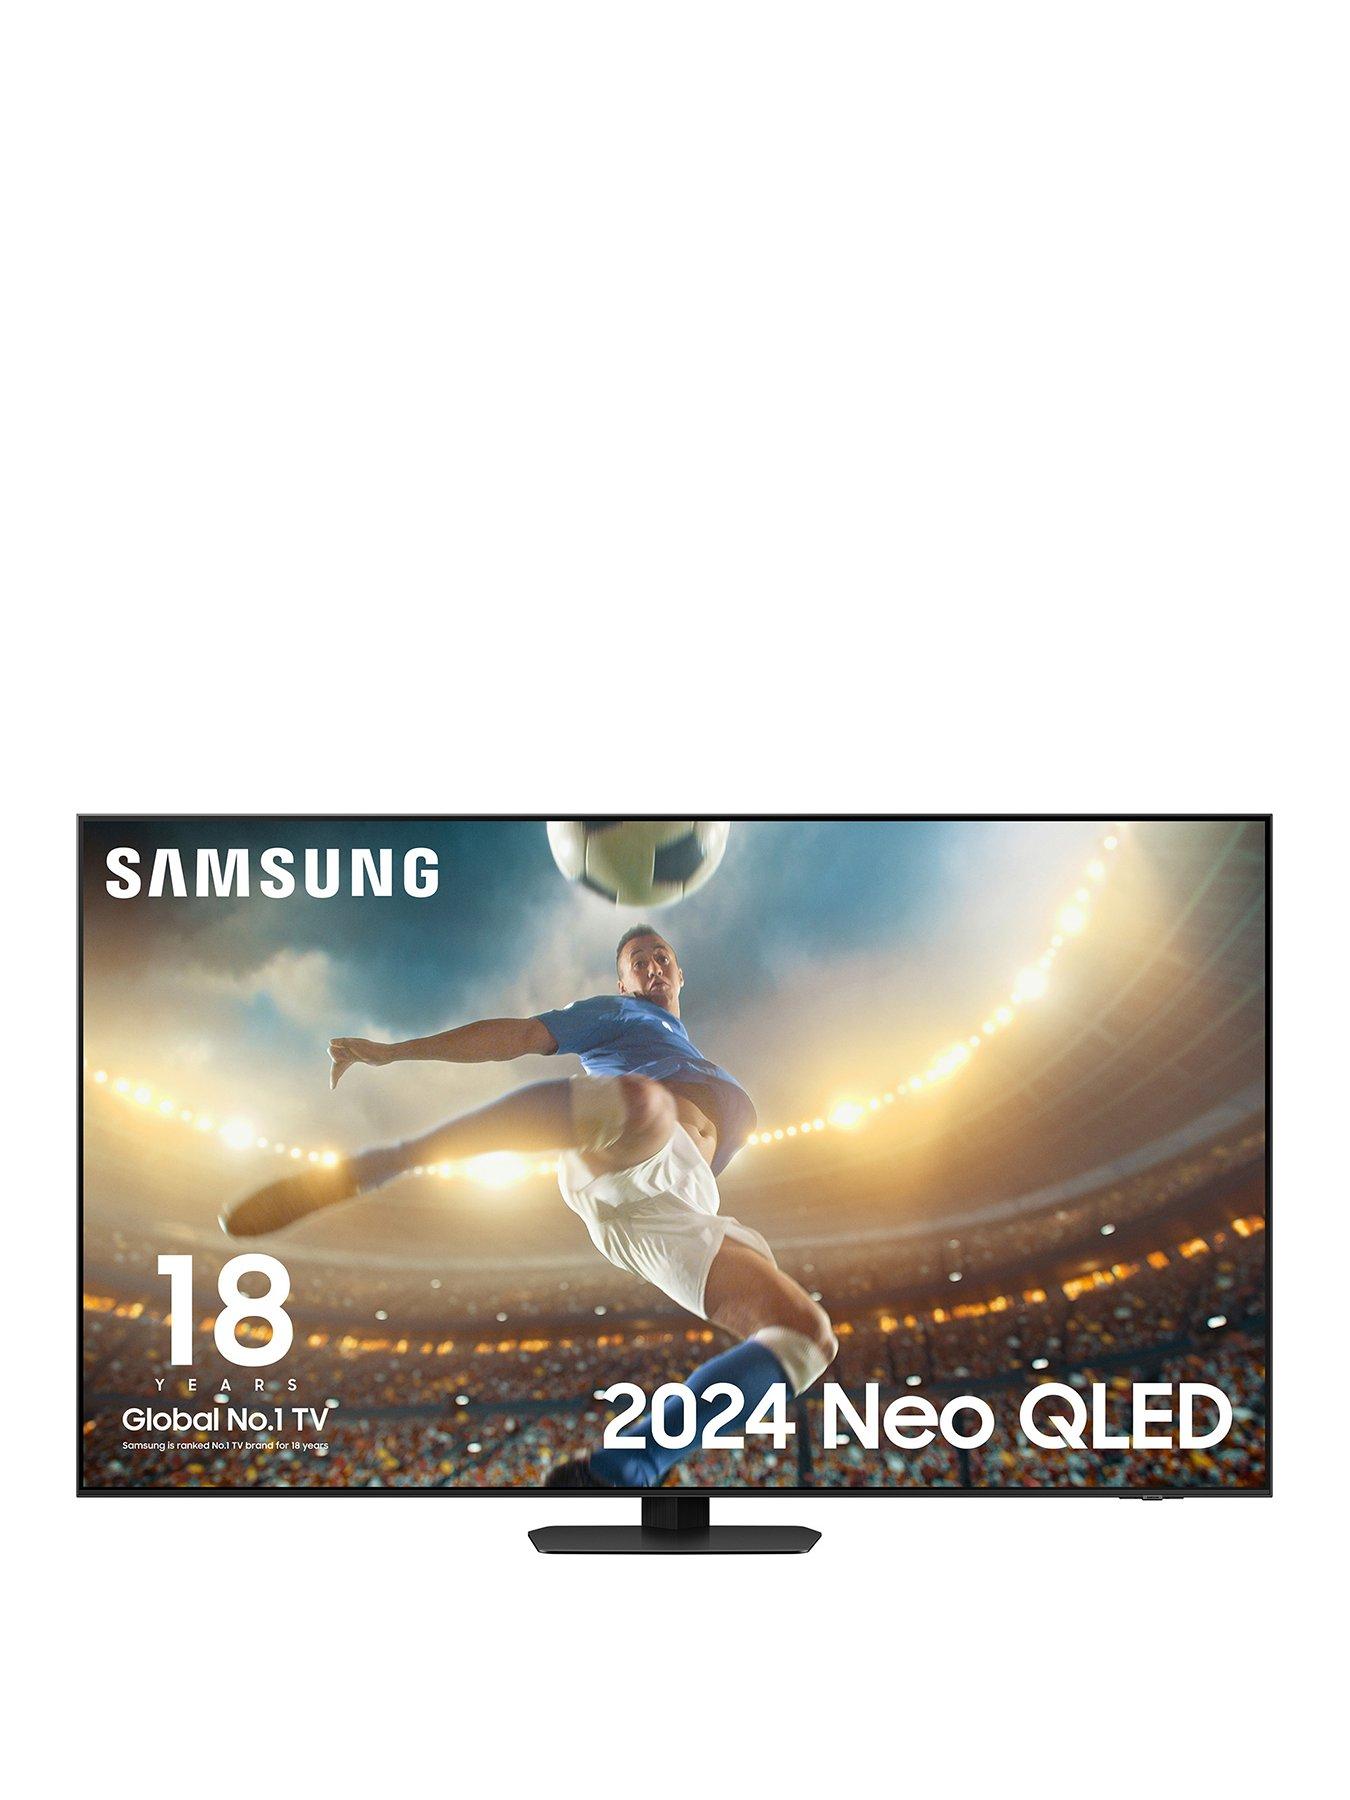 Samsung Qn90D, 65 Inch, Neo Qled, 4K Smart Tv With Anti-Reflection